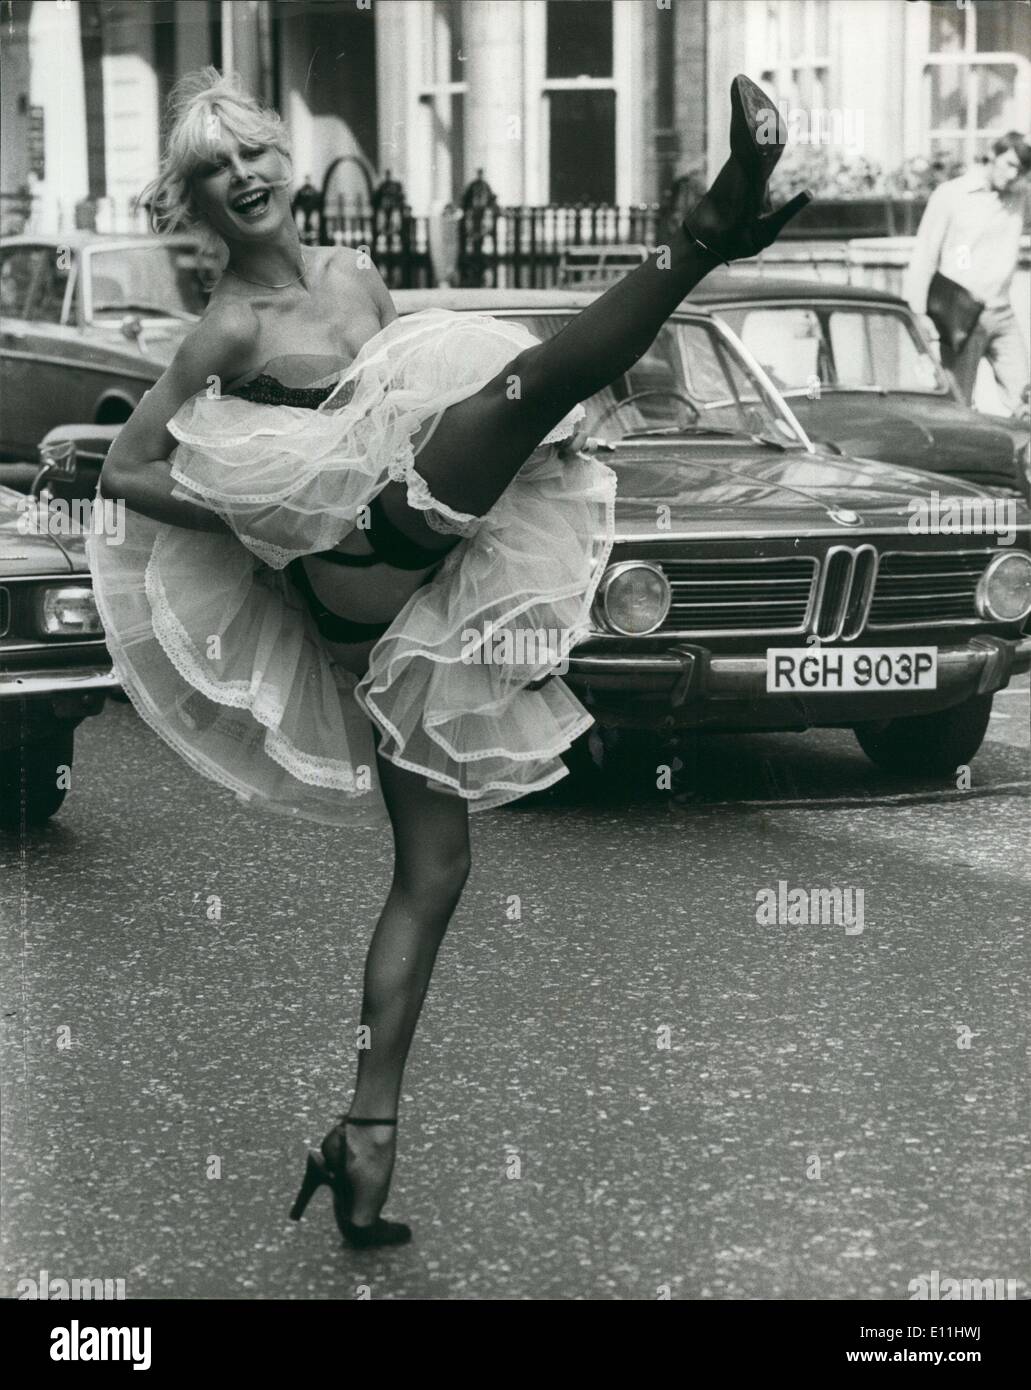 Jul. 07, 1978 - The Legs steal The Show: Model and ''pop'' singer Jilly Johnson, was modelling Autumn fashions by Tesco at the Dorchester Hotel in London, but the legs of Jilly are more eye-catching then the frilly can-can petticoat that she was wearing. Stock Photo